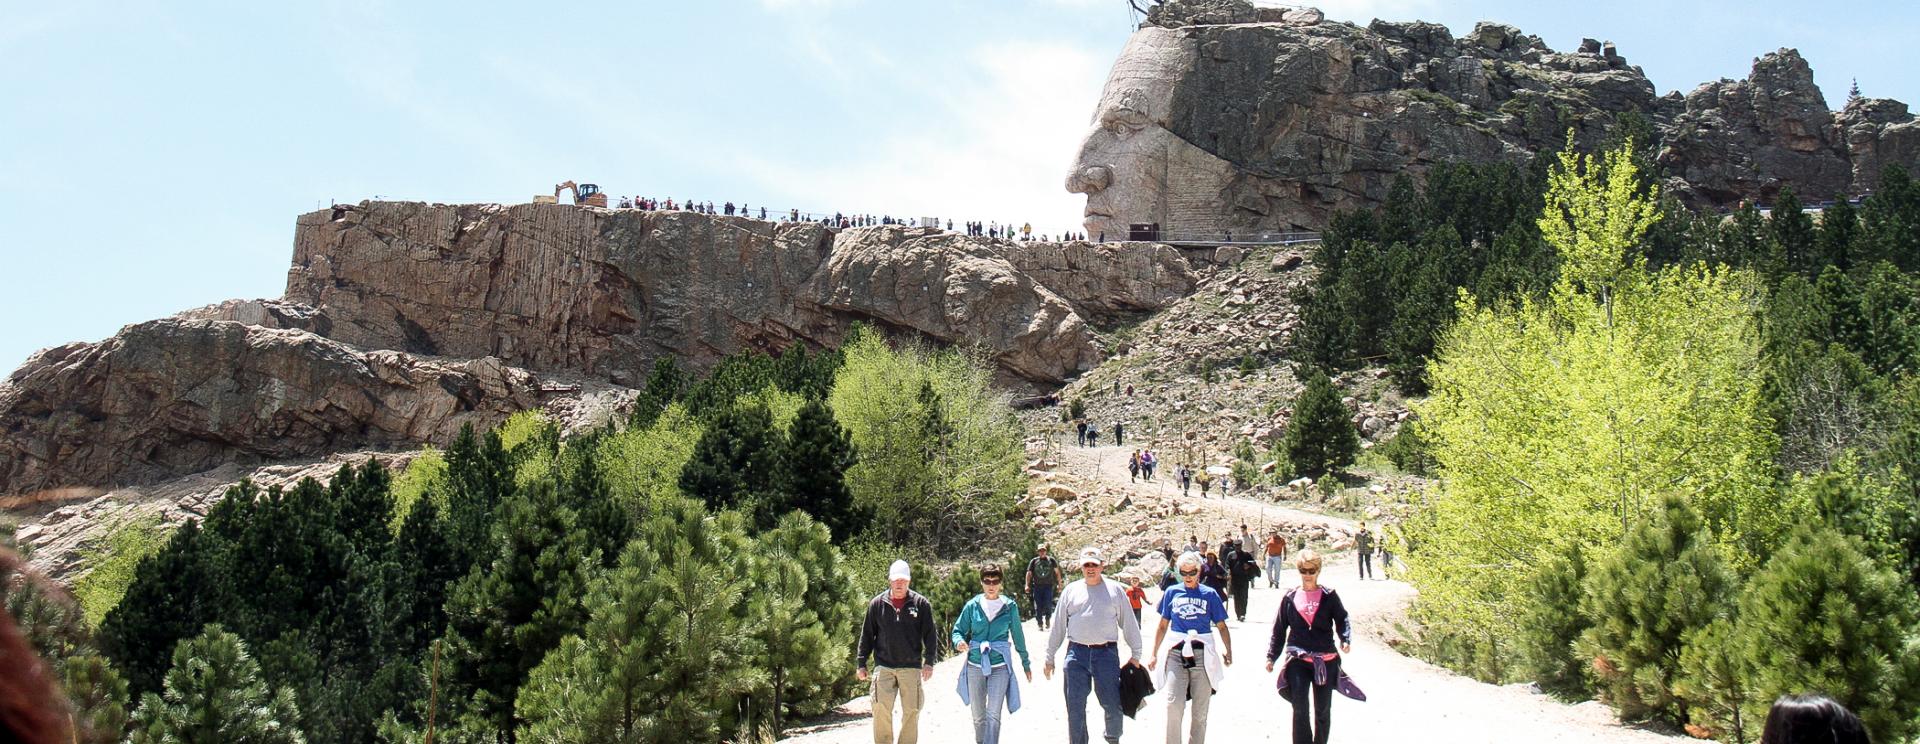 The Best Fall Festivities in the Black Hills and Badlands